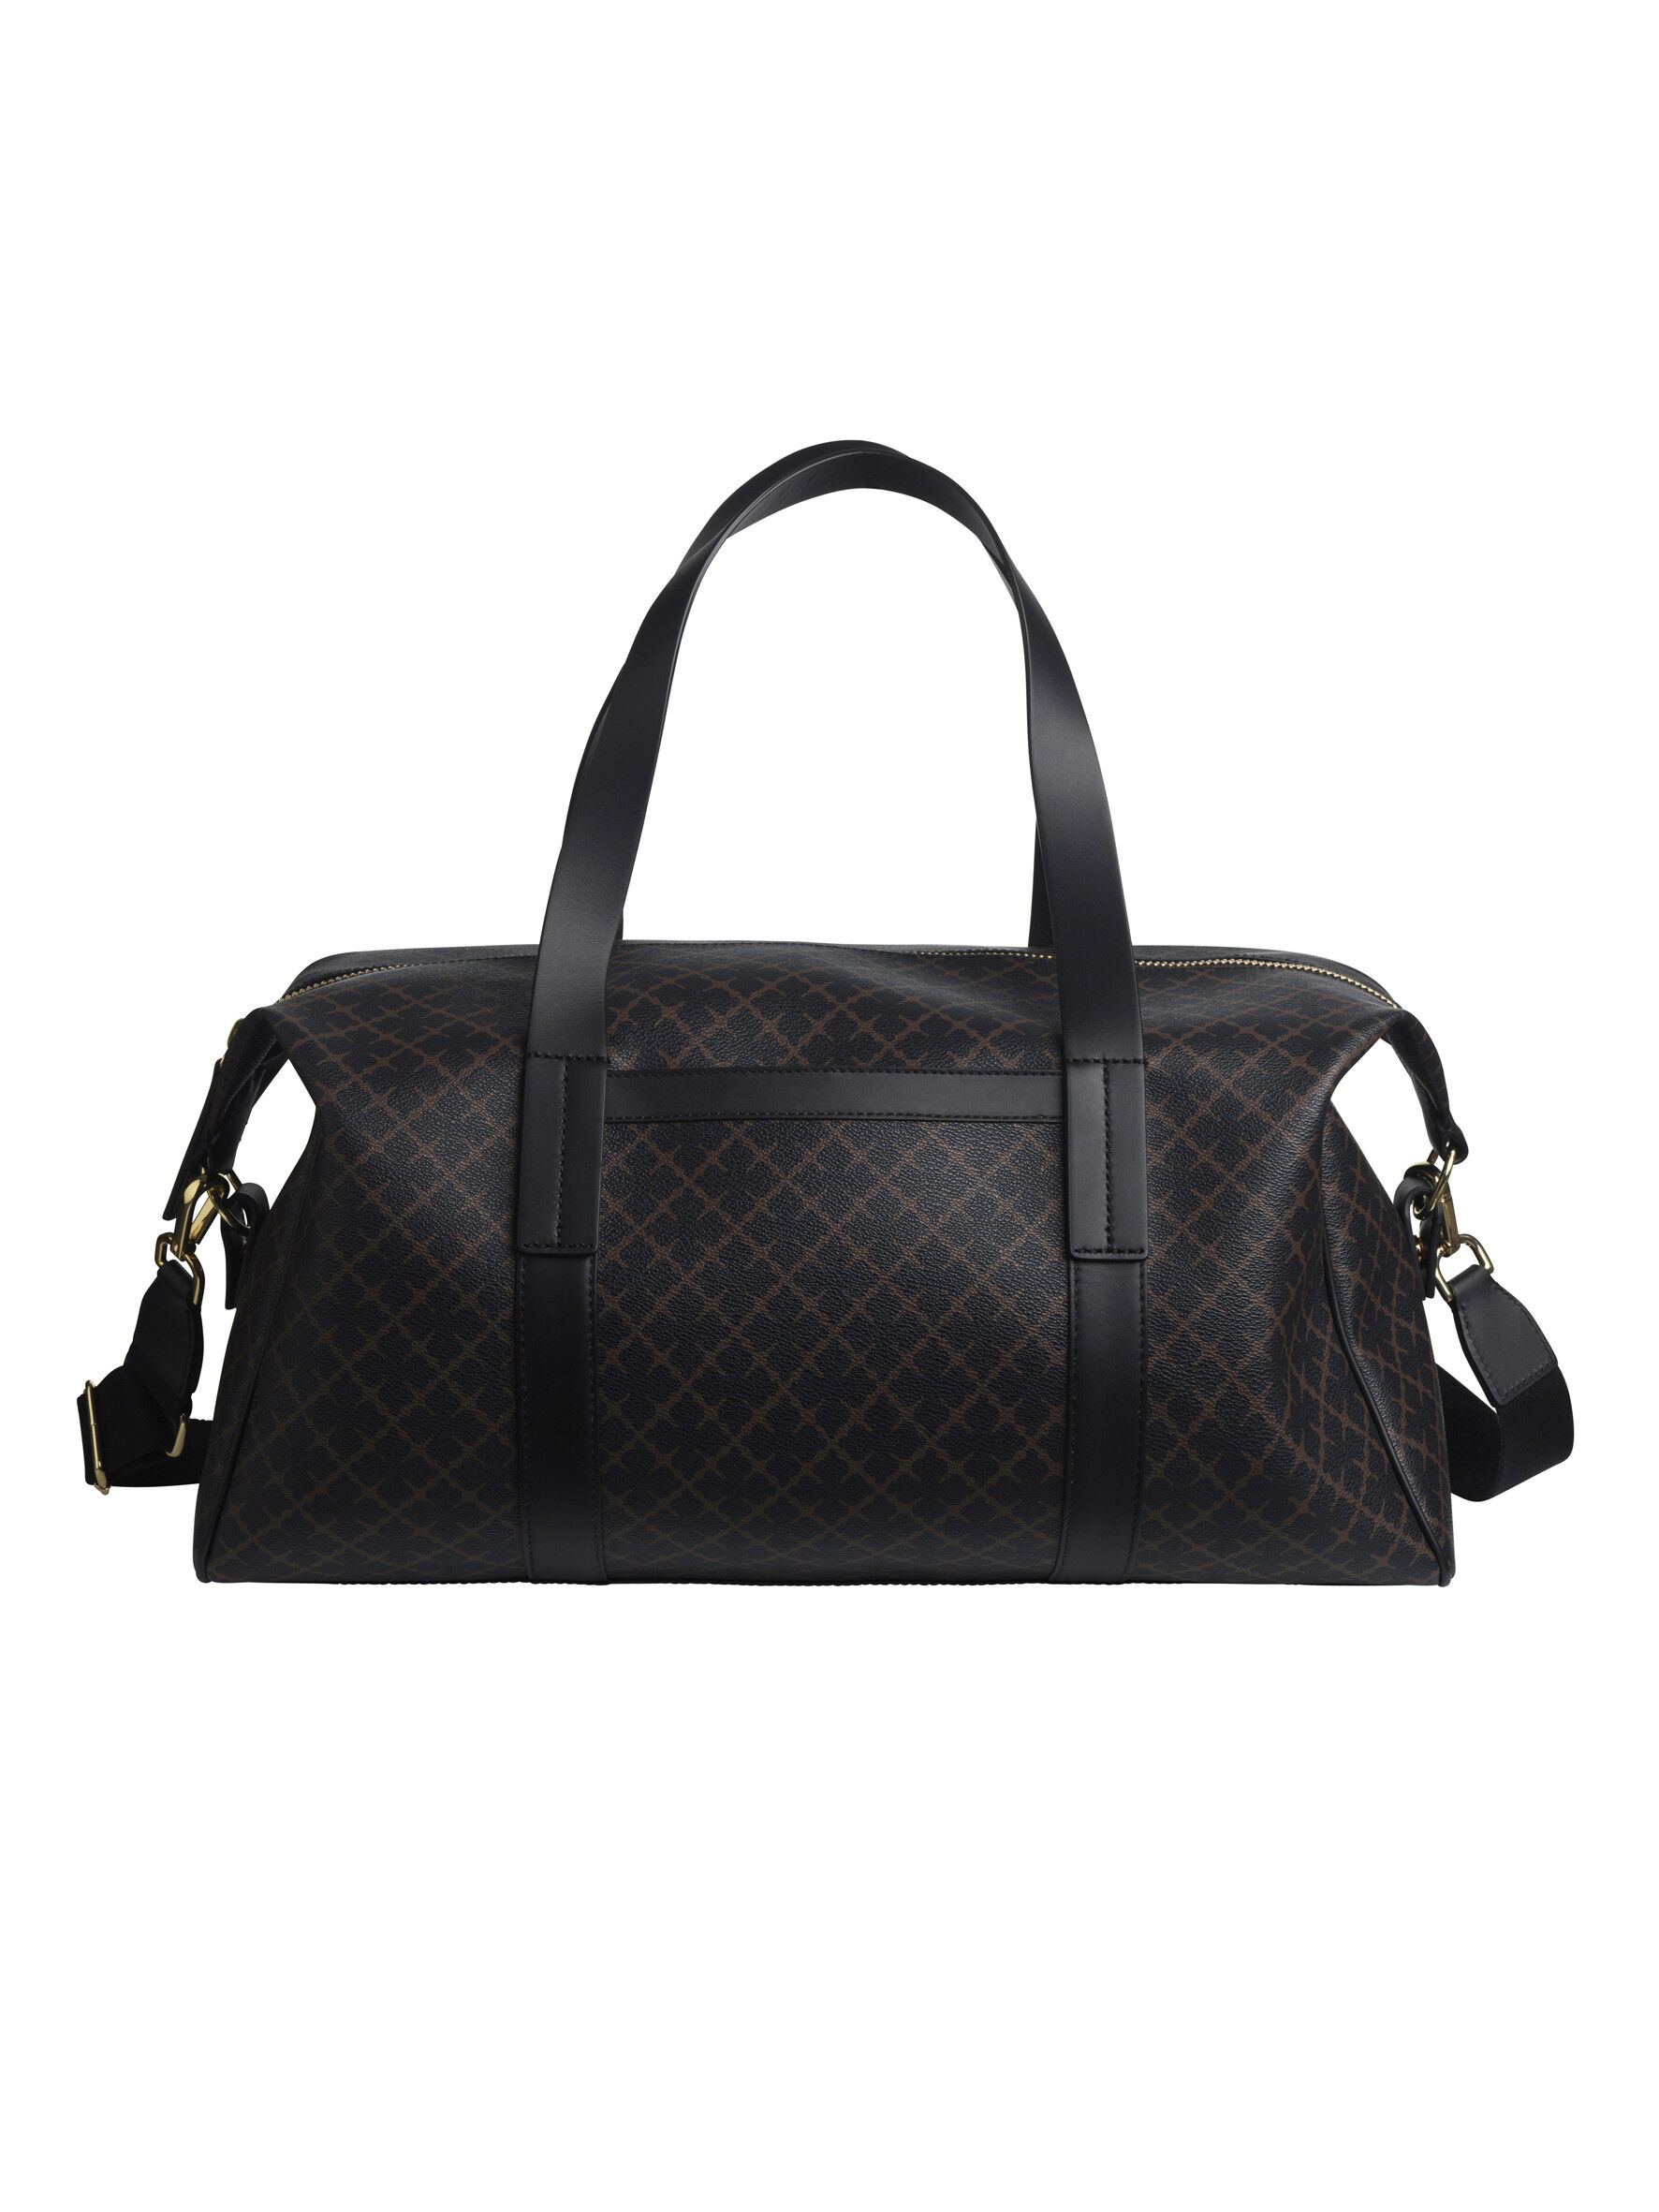 online shopping sites for travel bags